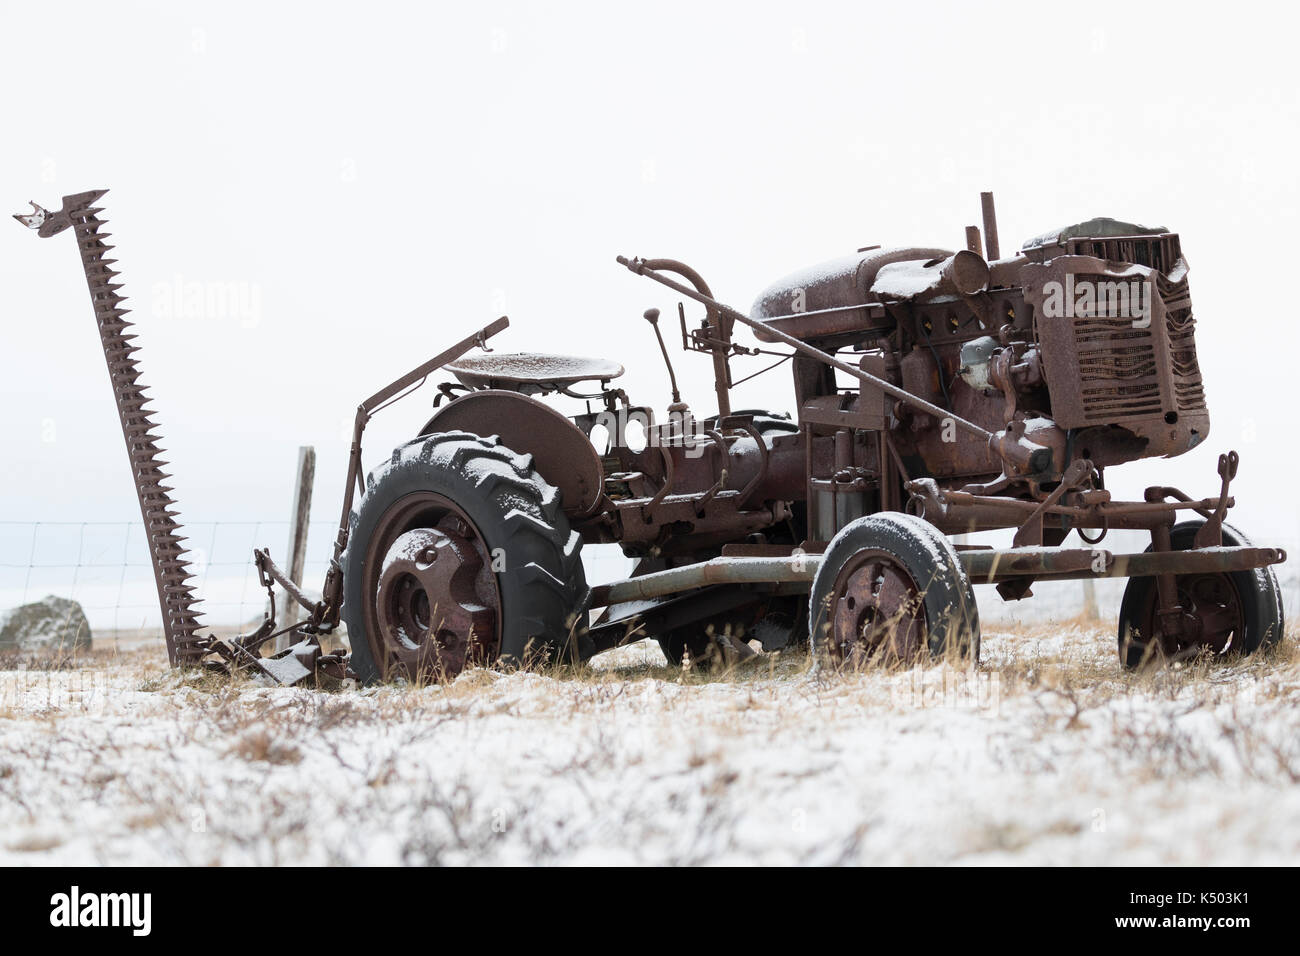 Abandoned Tractor In A Field Stock Photos & Abandoned Tractor In A ...